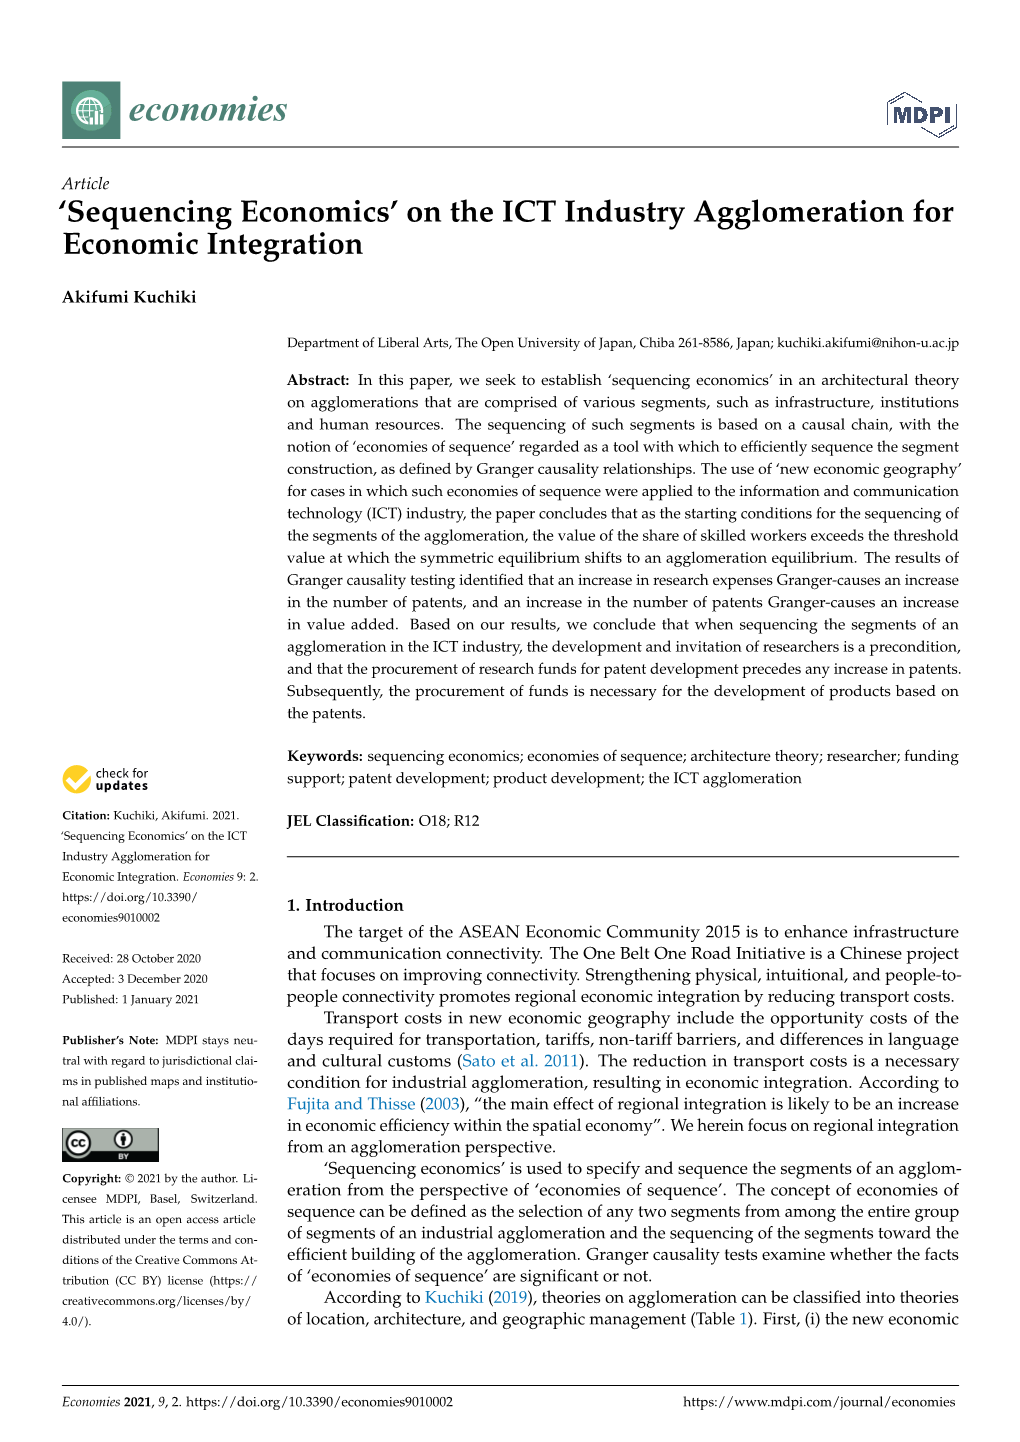 On the ICT Industry Agglomeration for Economic Integration